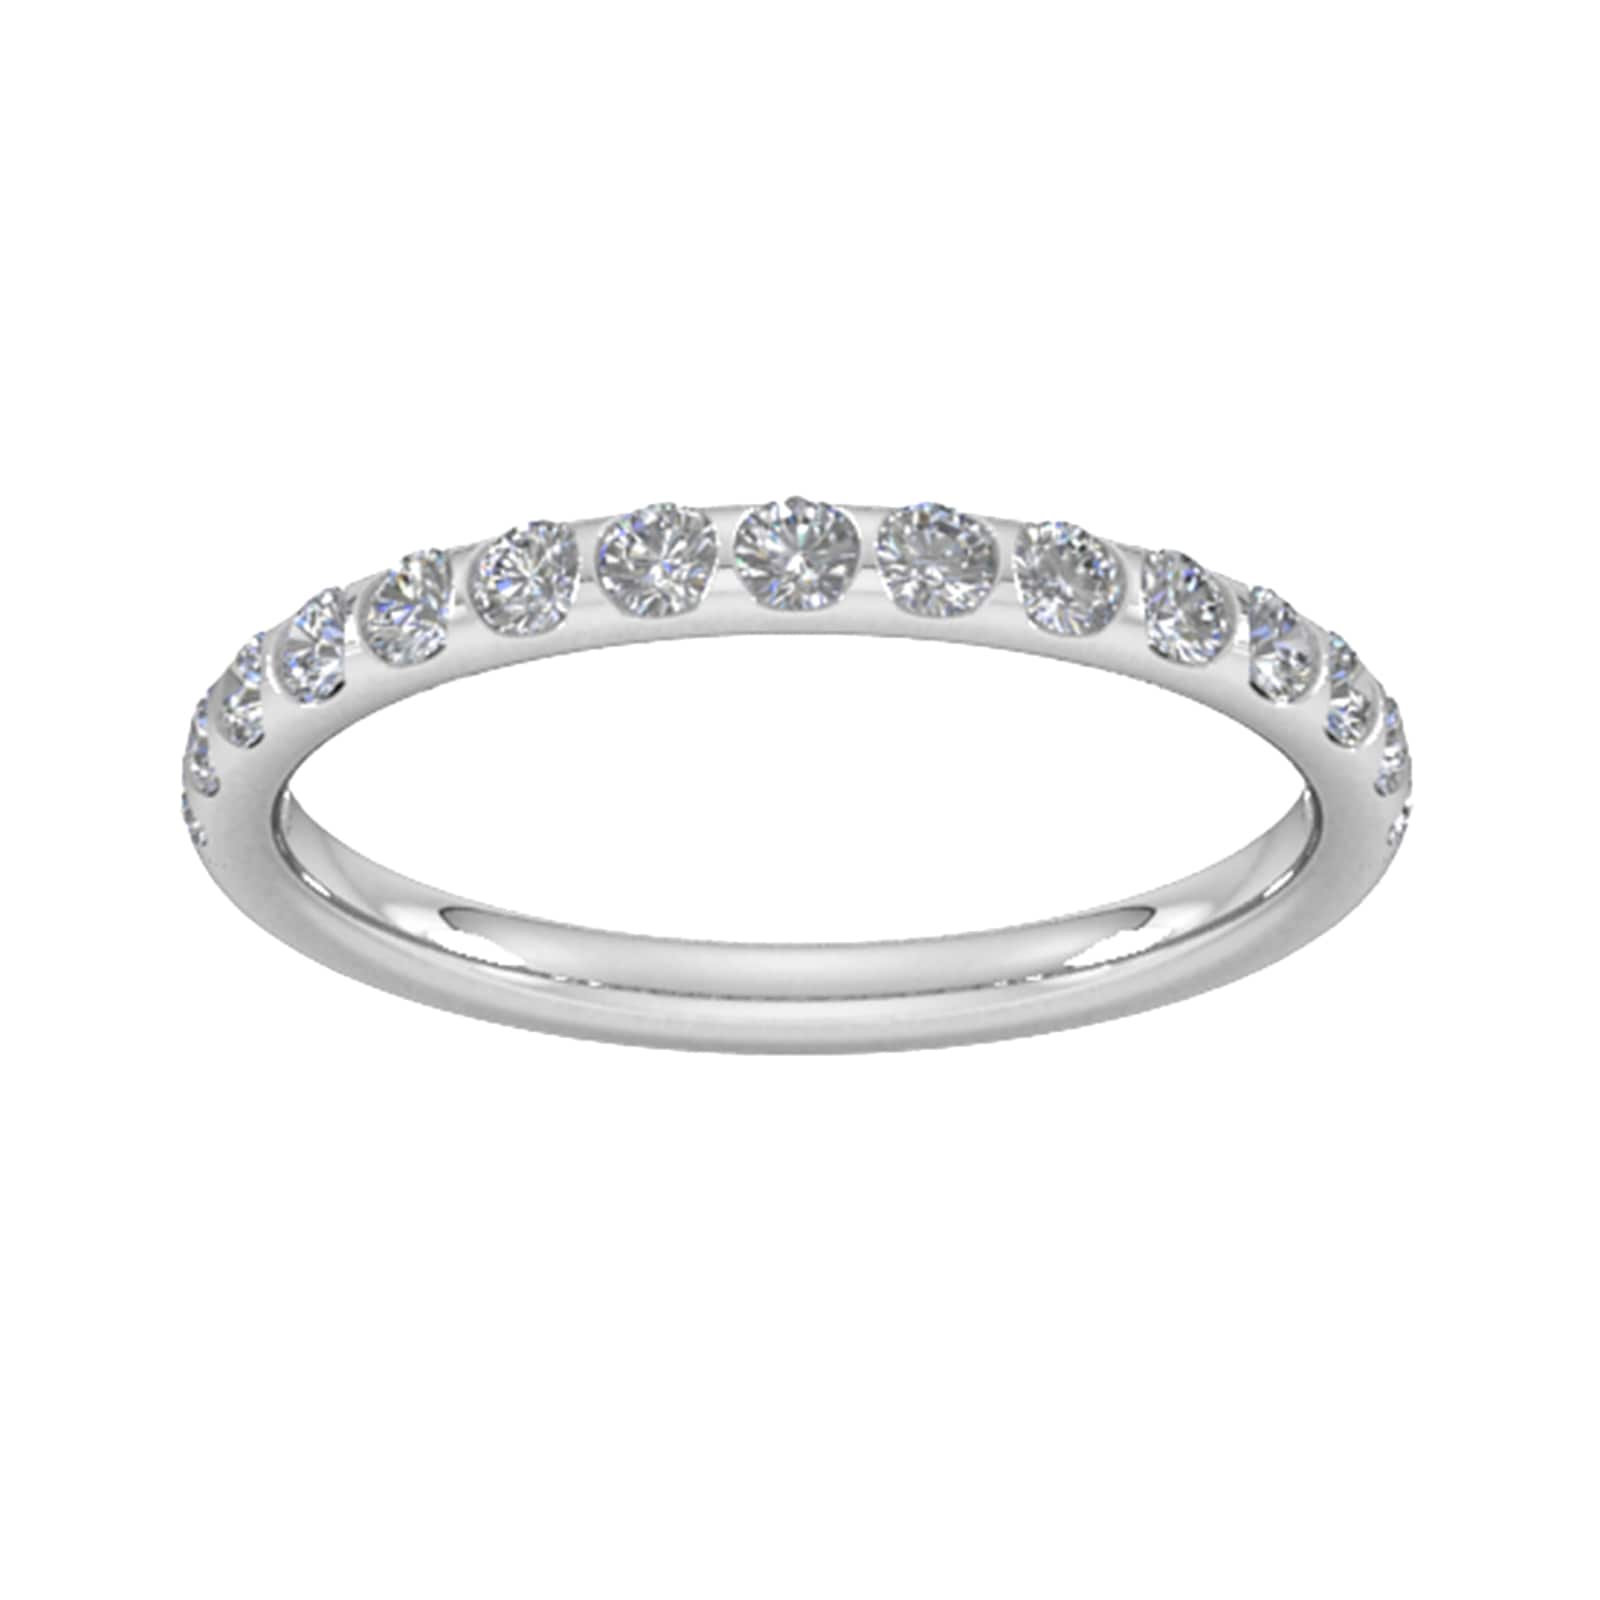 0.53 Carat Total Weight Curved Bar Brilliant Cut Diamond Set Wedding Ring In Platinum - Ring Size R